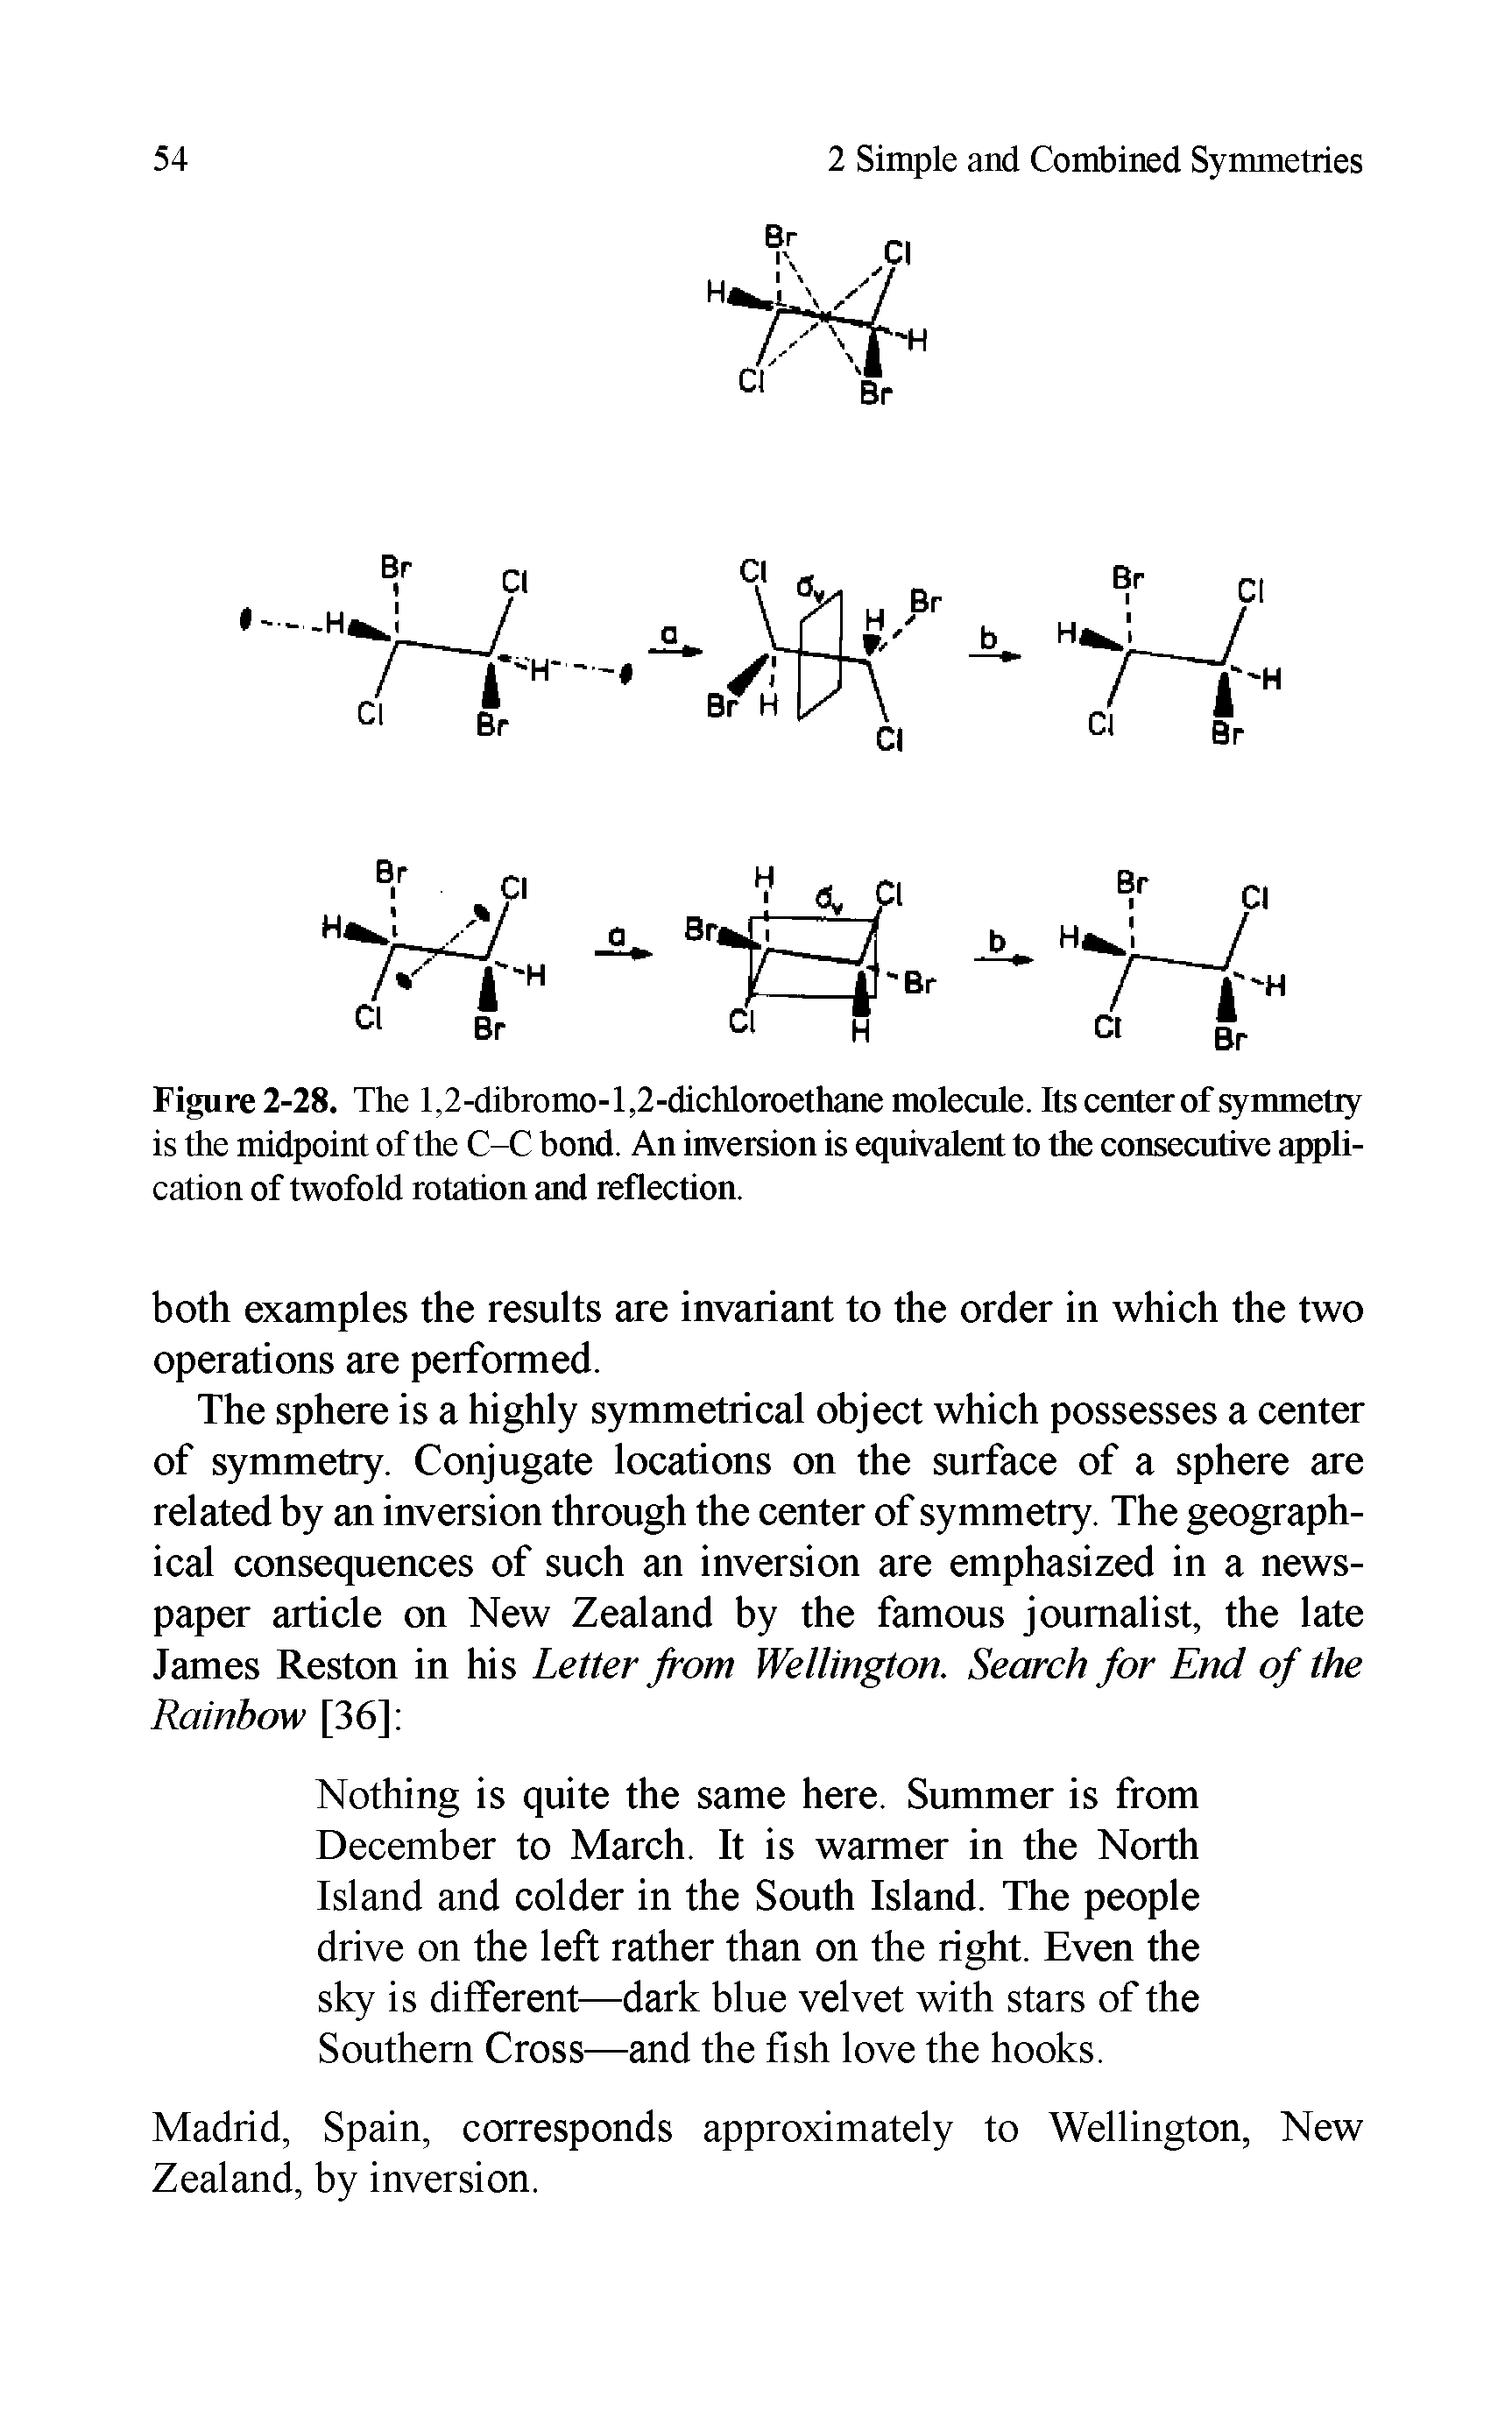 Figure 2-28. The l,2-dibromo-l,2-dichloroethane molecule. Its center of symmetry is the midpoint of the C-C bond. An inversion is equivalent to the consecutive application of twofold rotation and reflection.